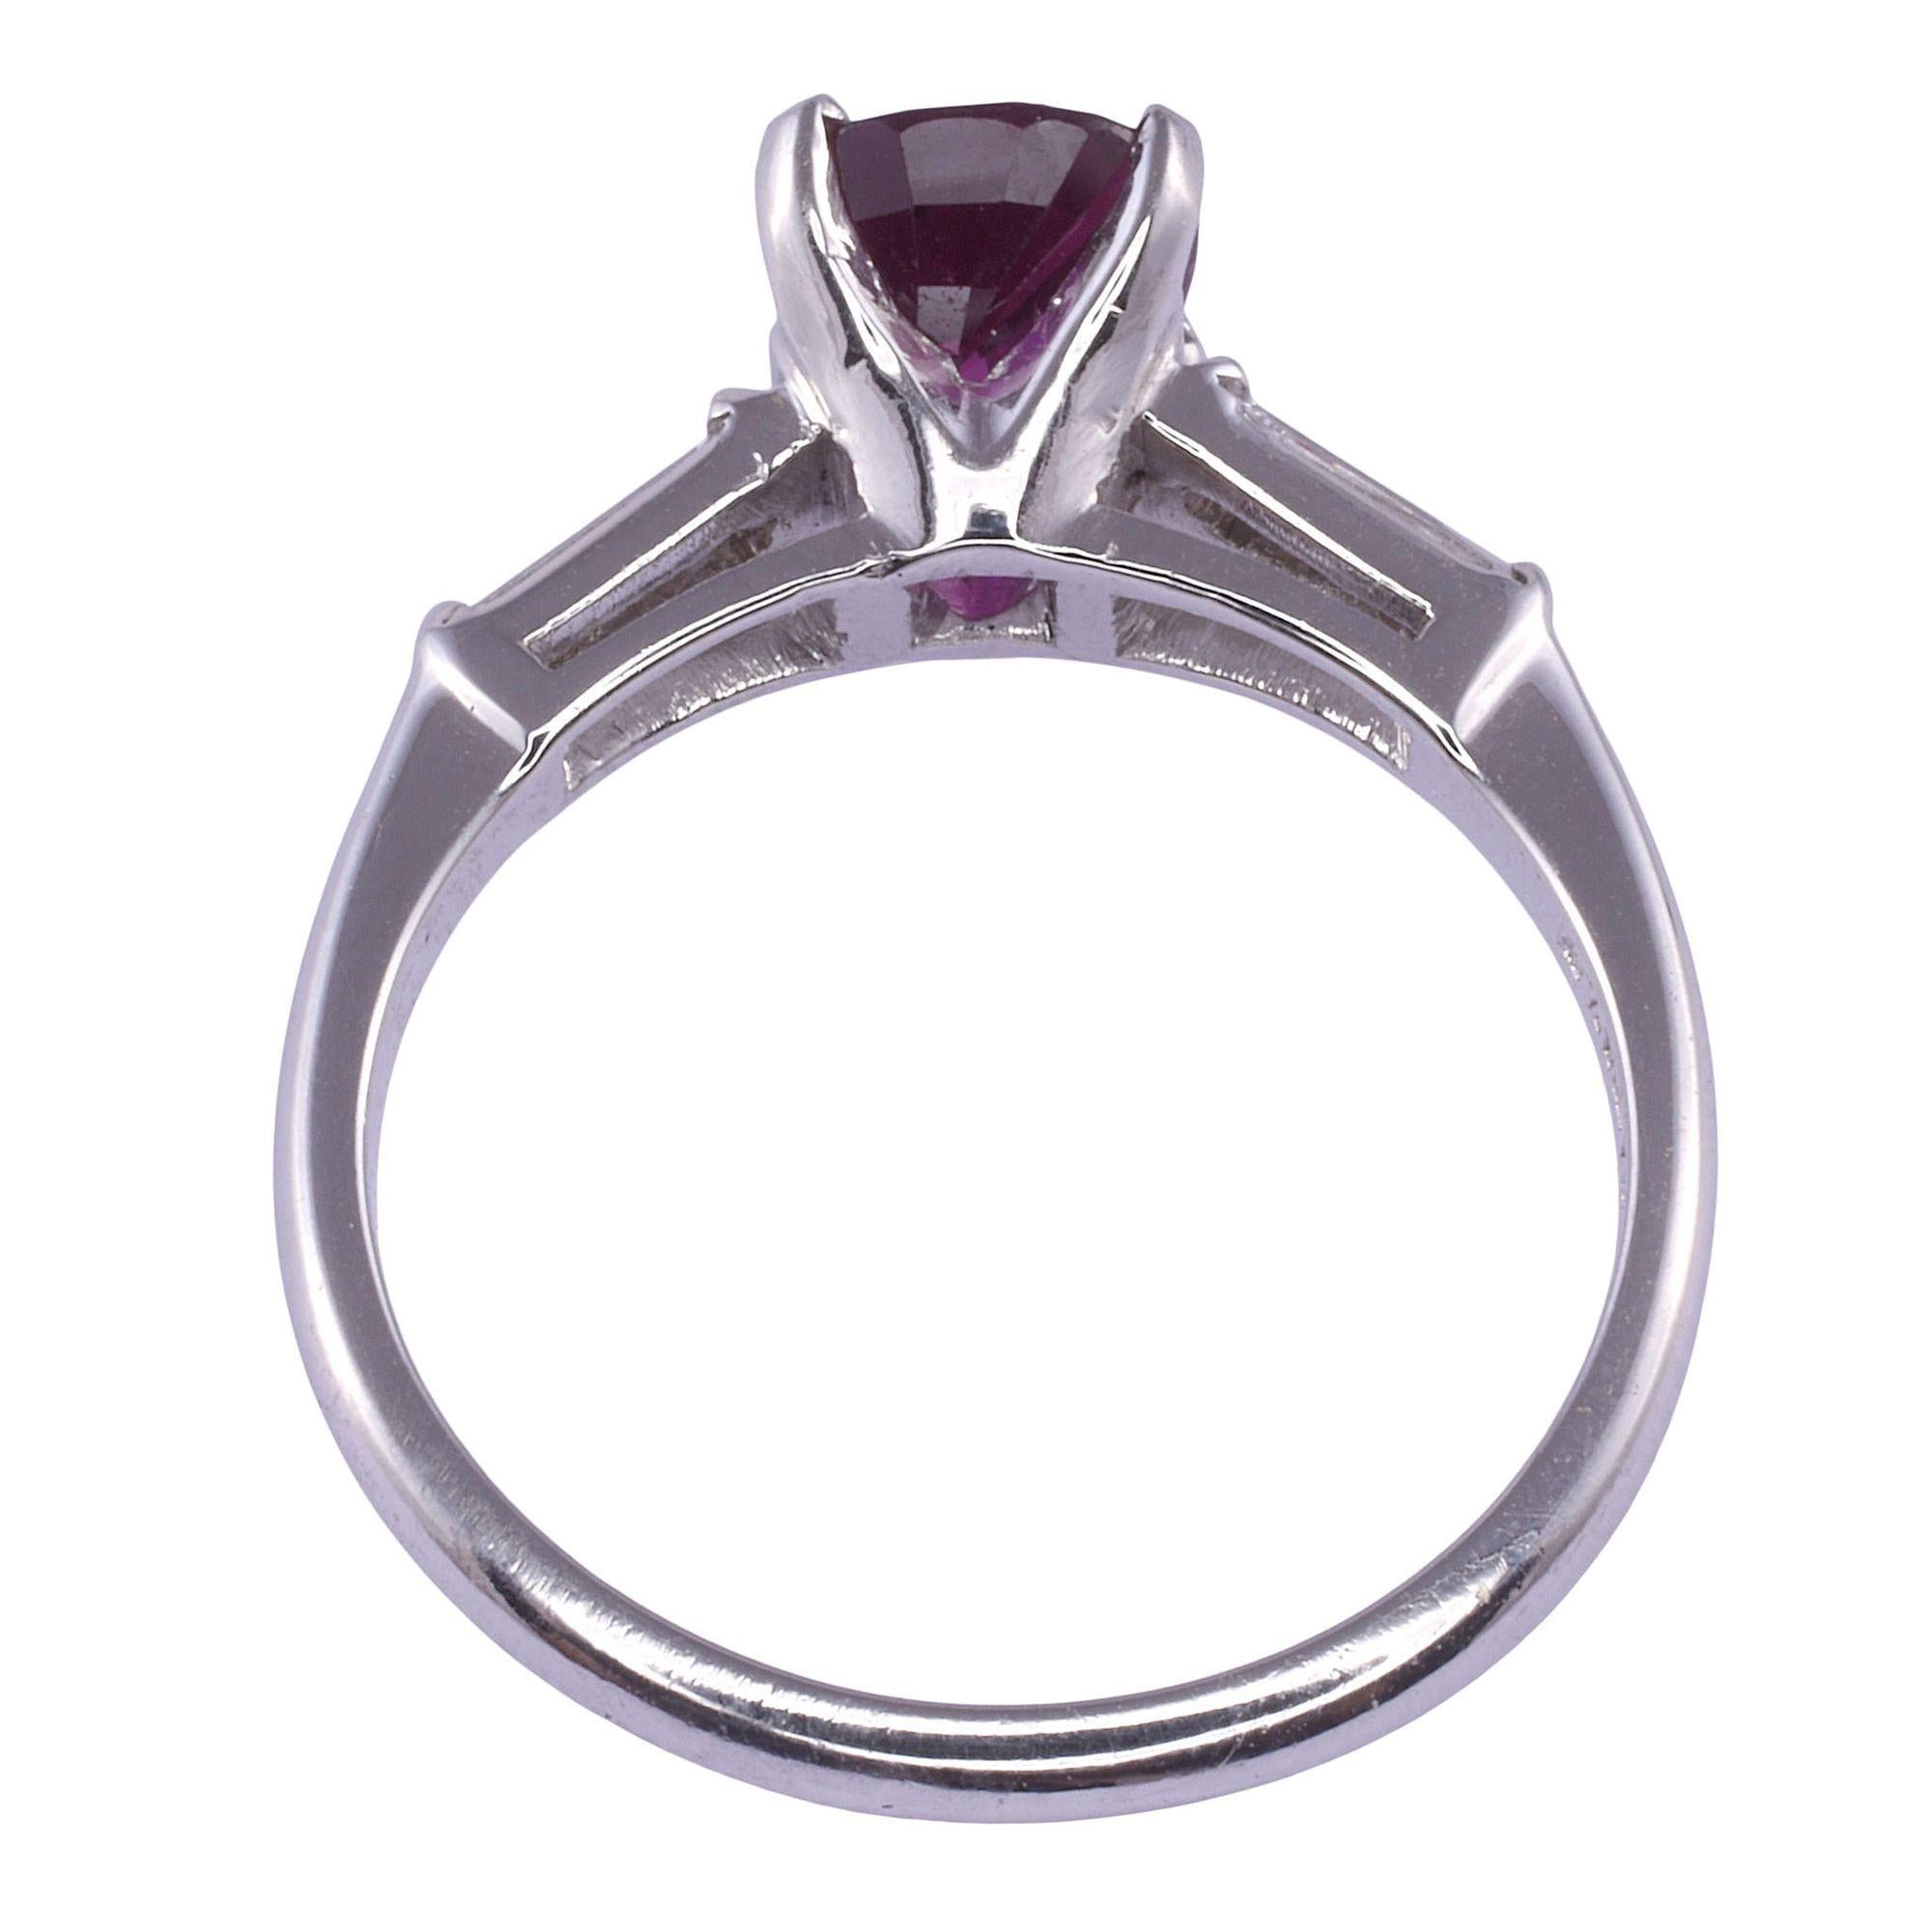 1.59 Carat Ruby Platinum Ring In Good Condition For Sale In Solvang, CA